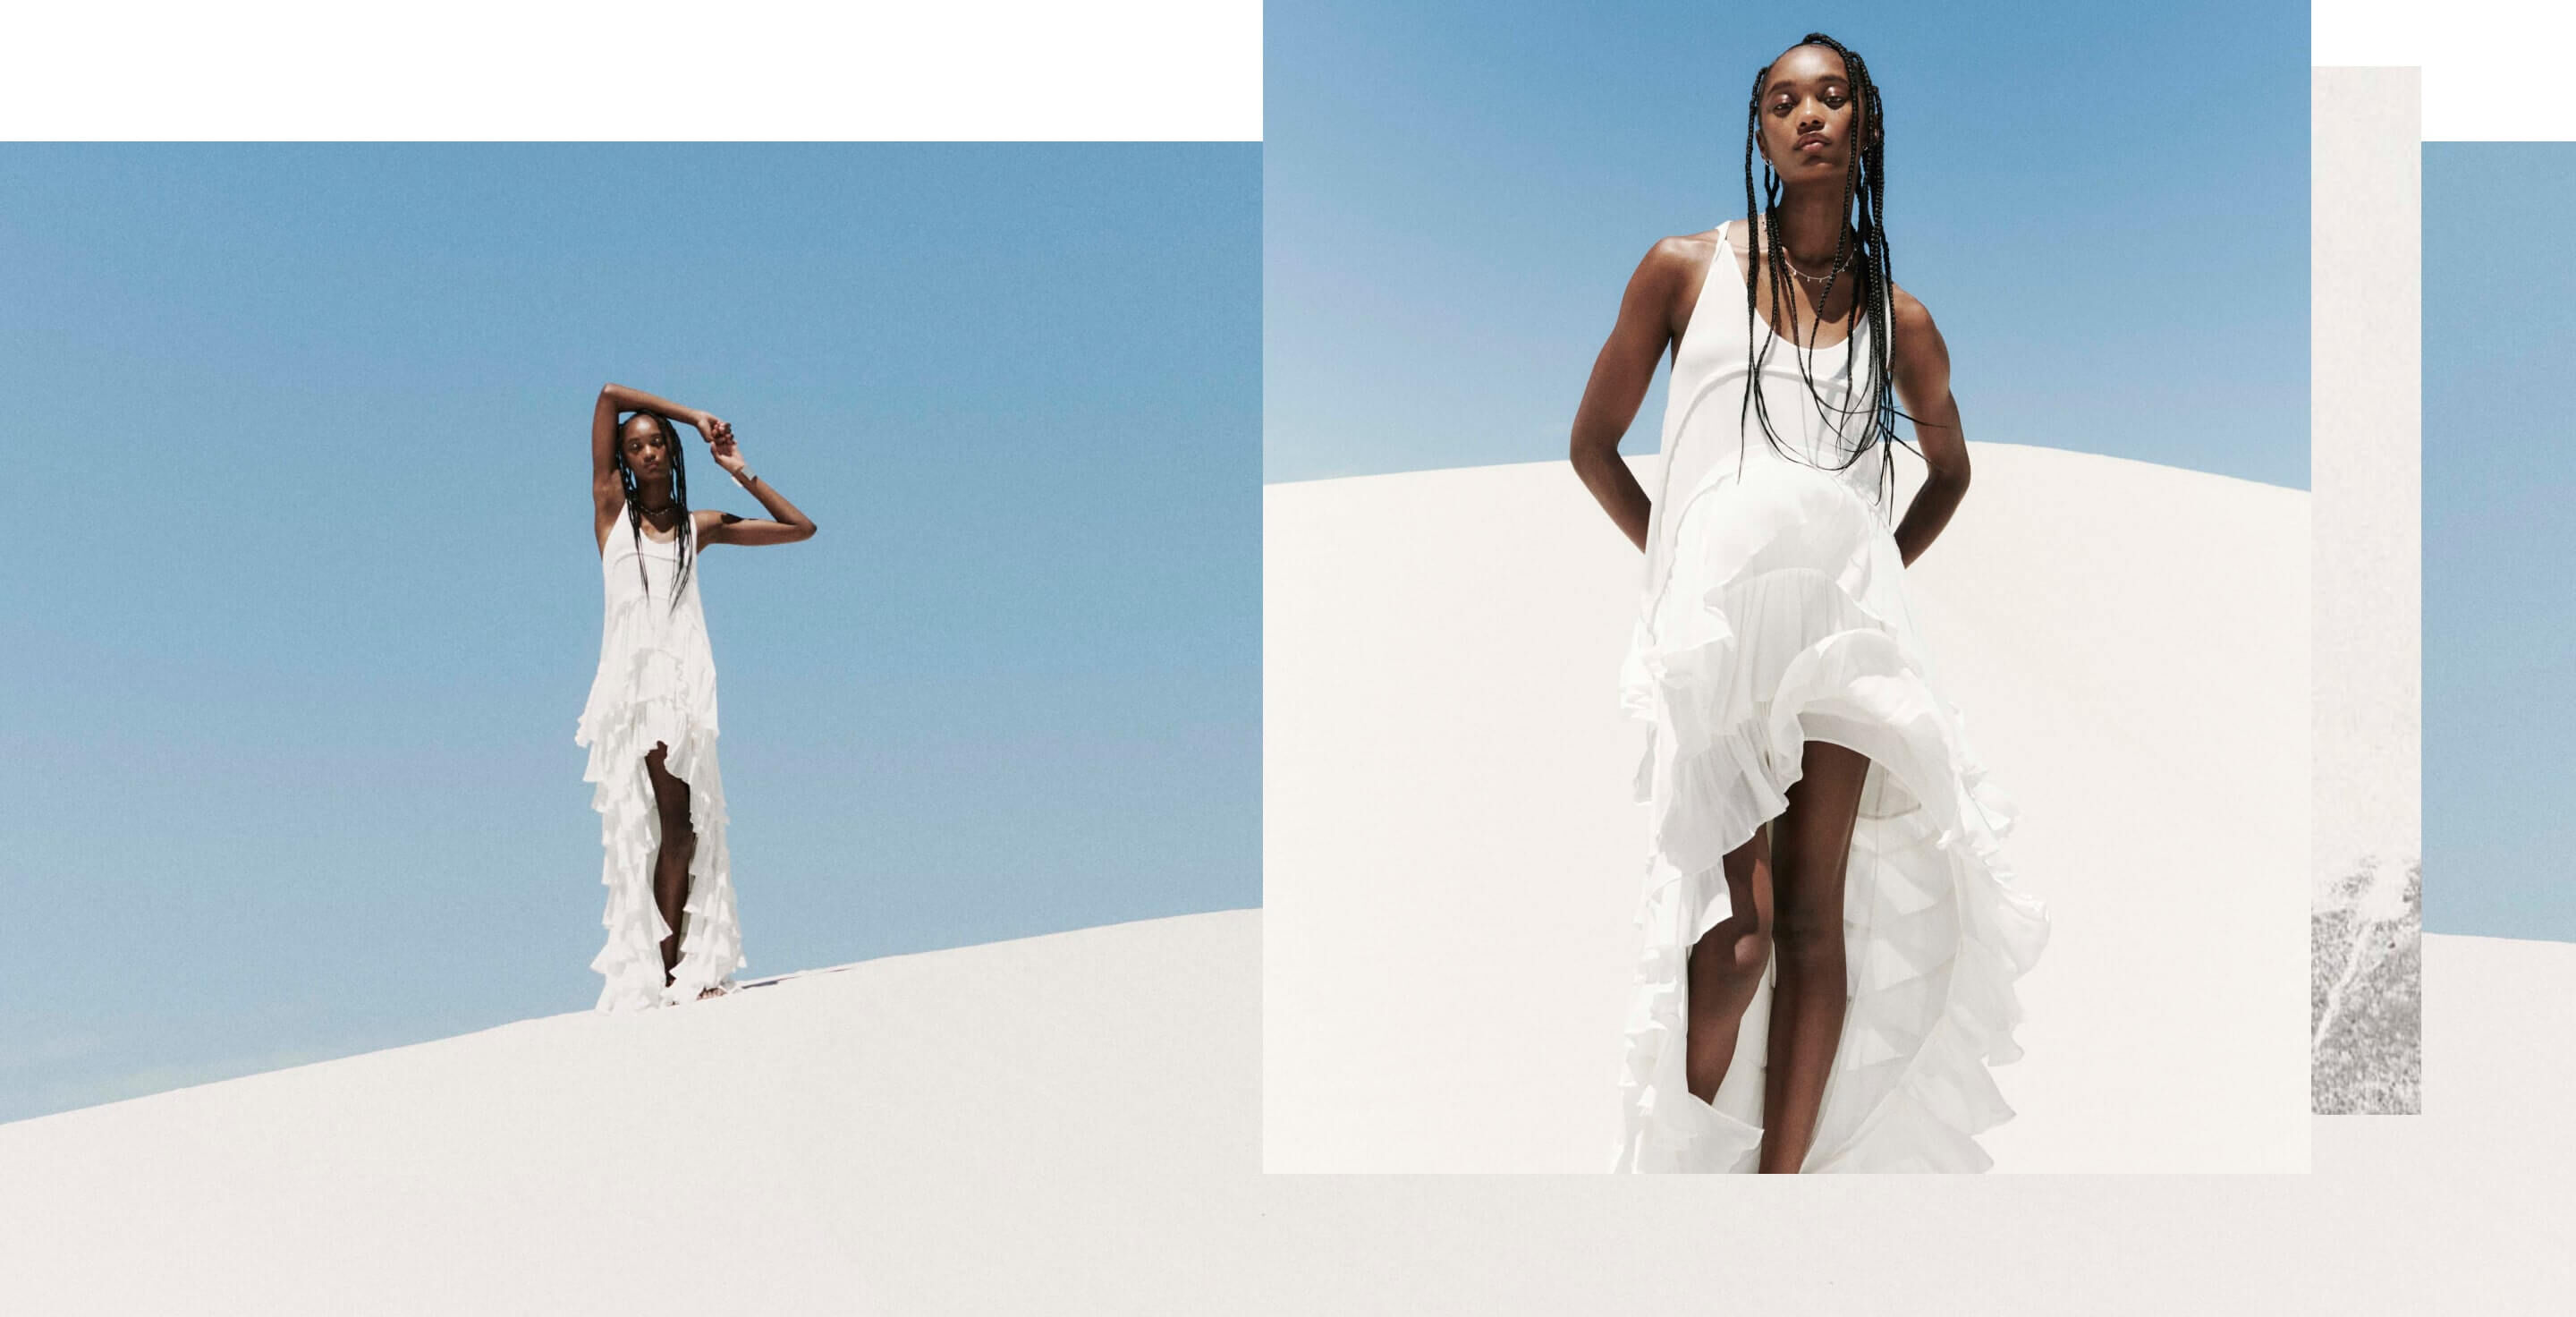 Collage of two photographs showing a woman wearing a long ruffled asymmetrical dress standing on a white dune in front of a blue sky